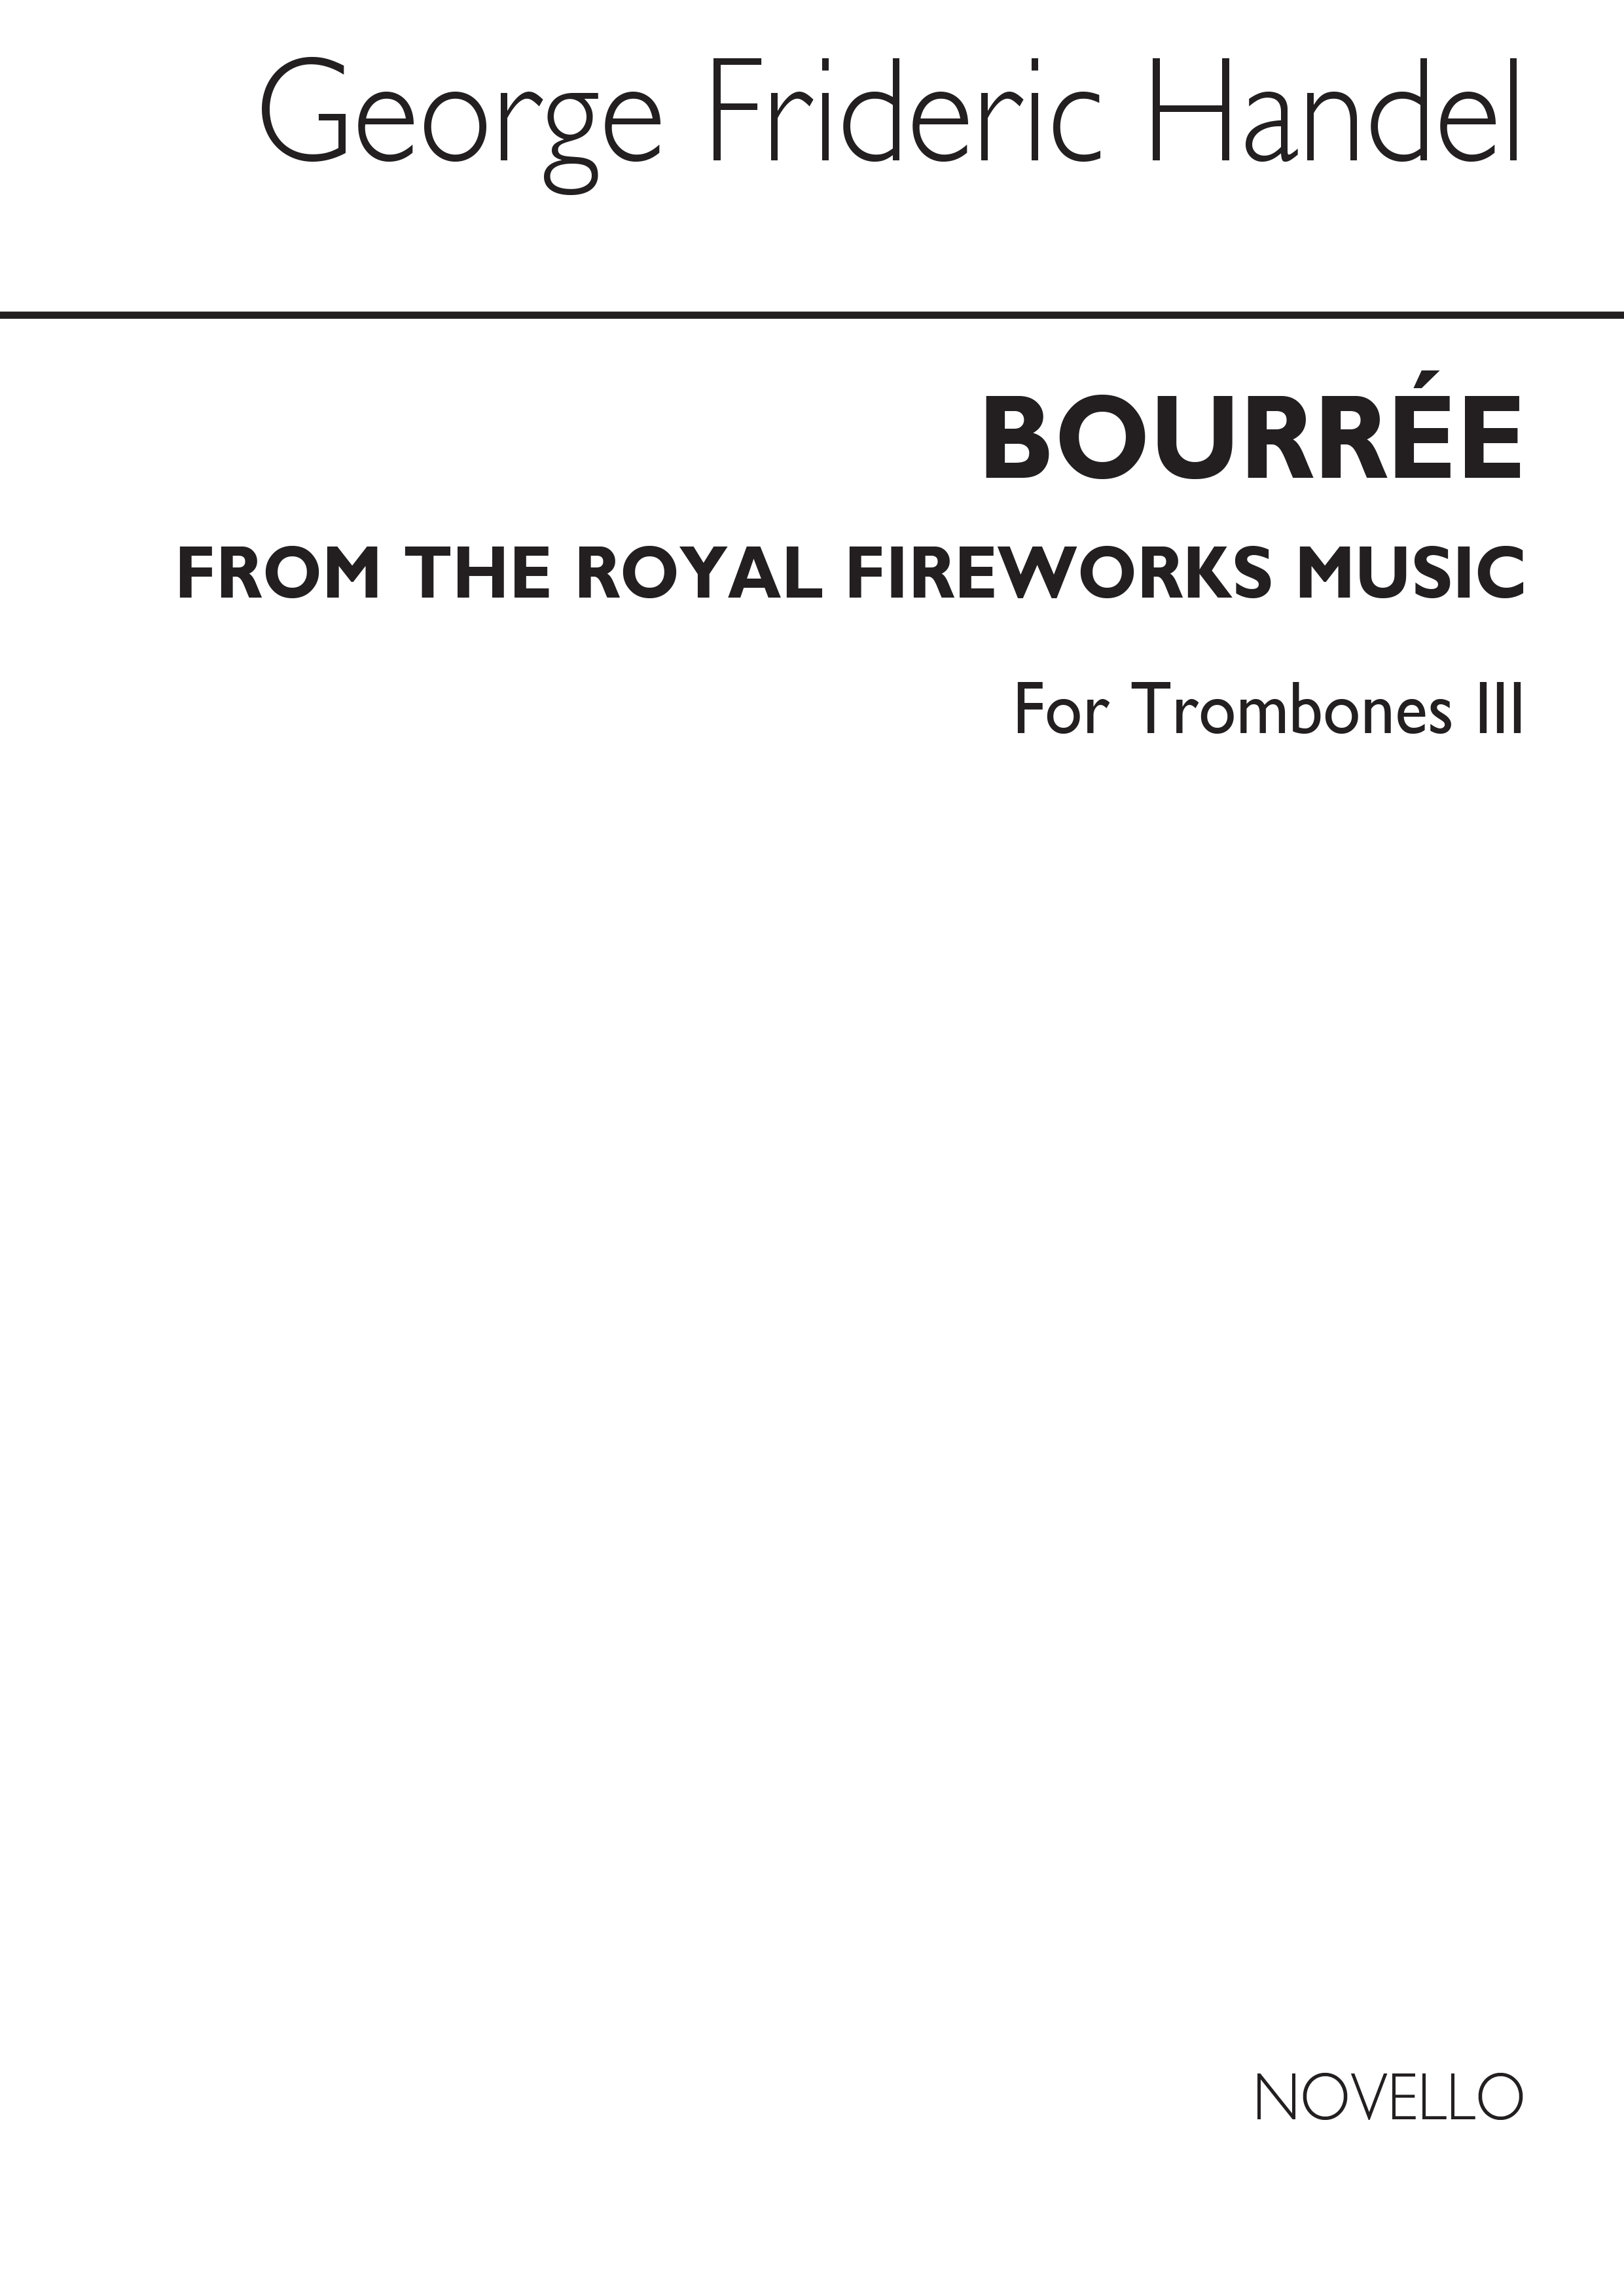 George Frideric Handel: Bourree From The Fireworks Music (Bc Tbn 3/Euph)